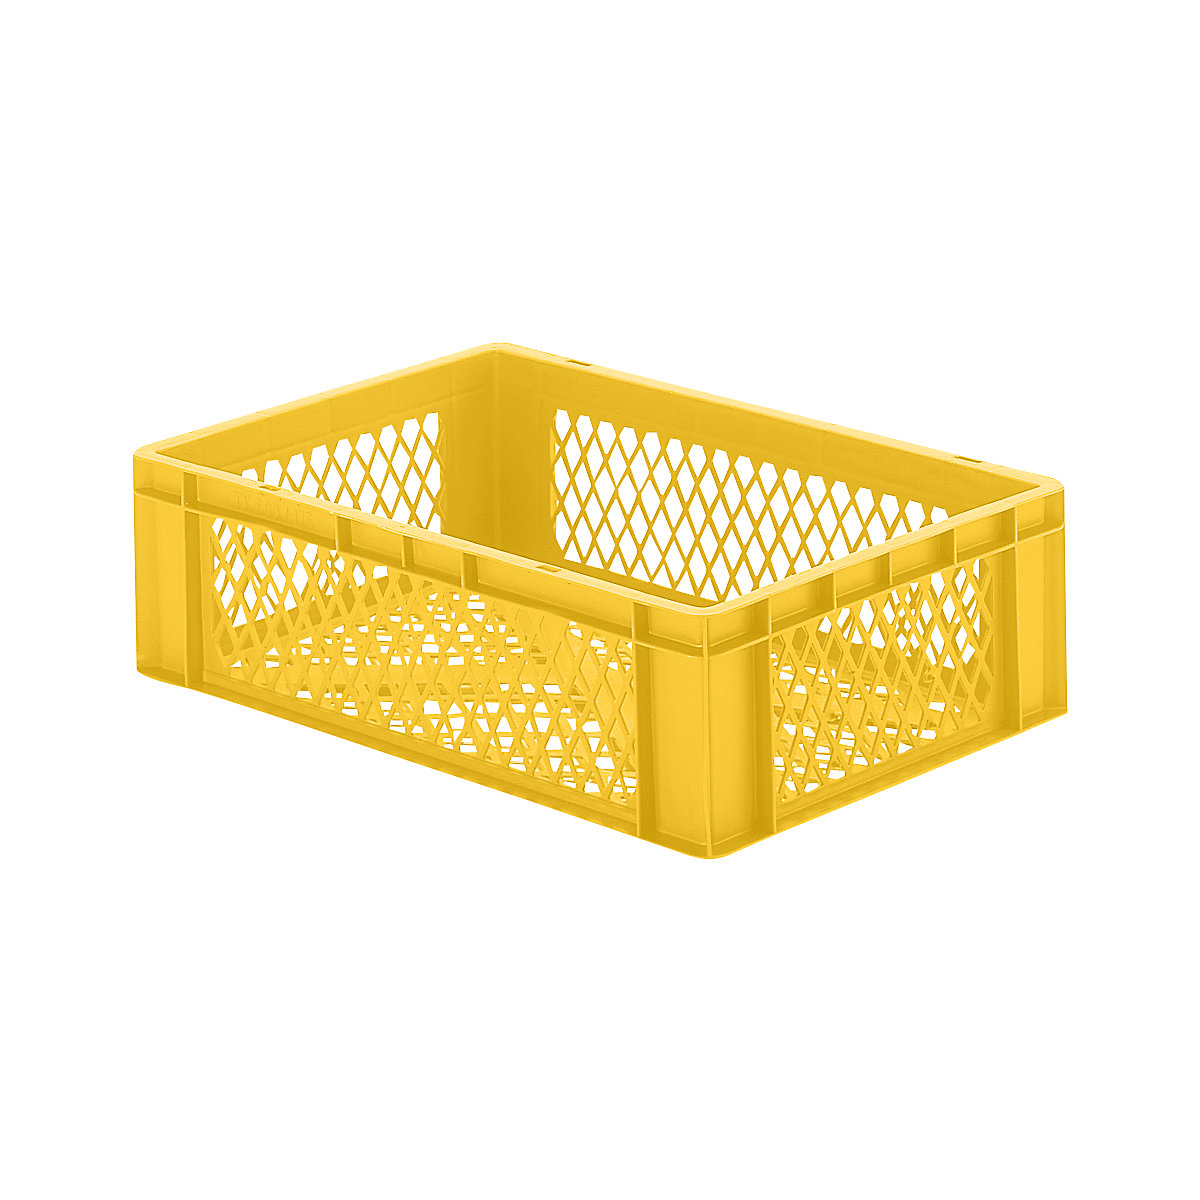 Euro stacking container, perforated walls and base